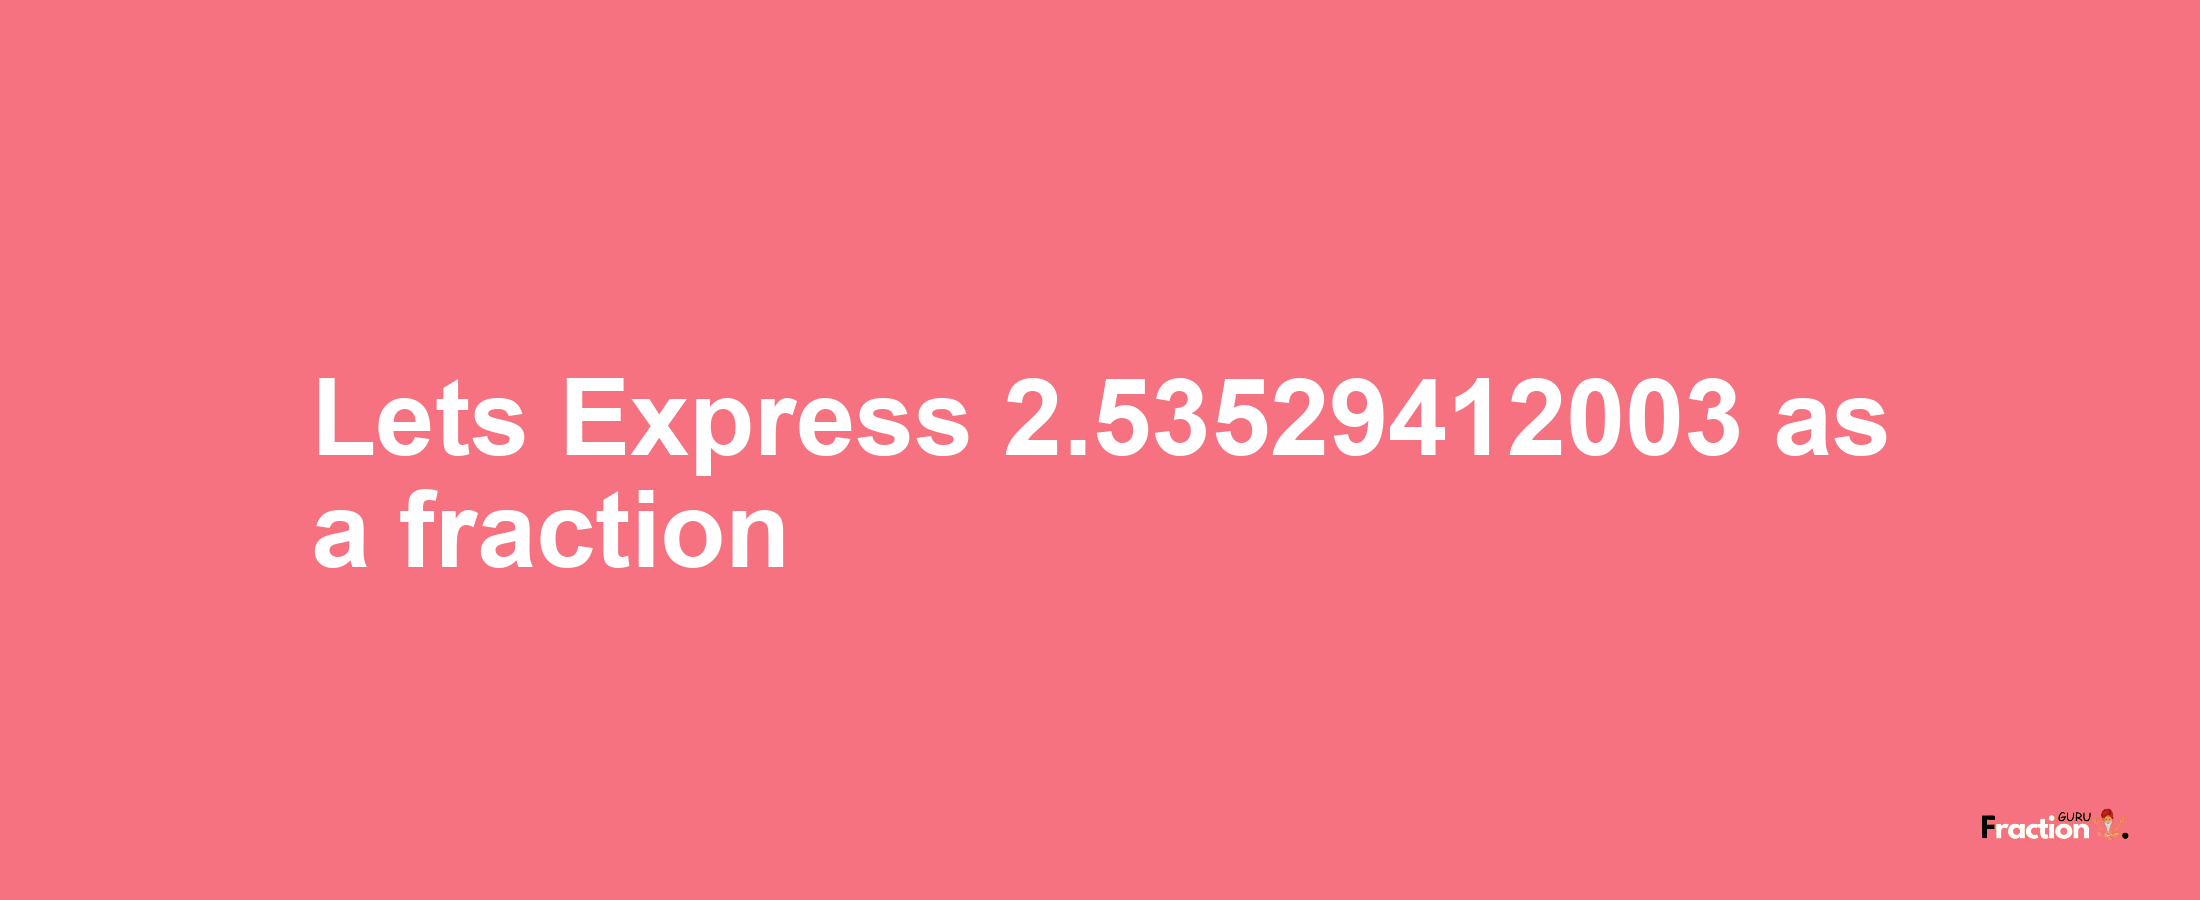 Lets Express 2.53529412003 as afraction